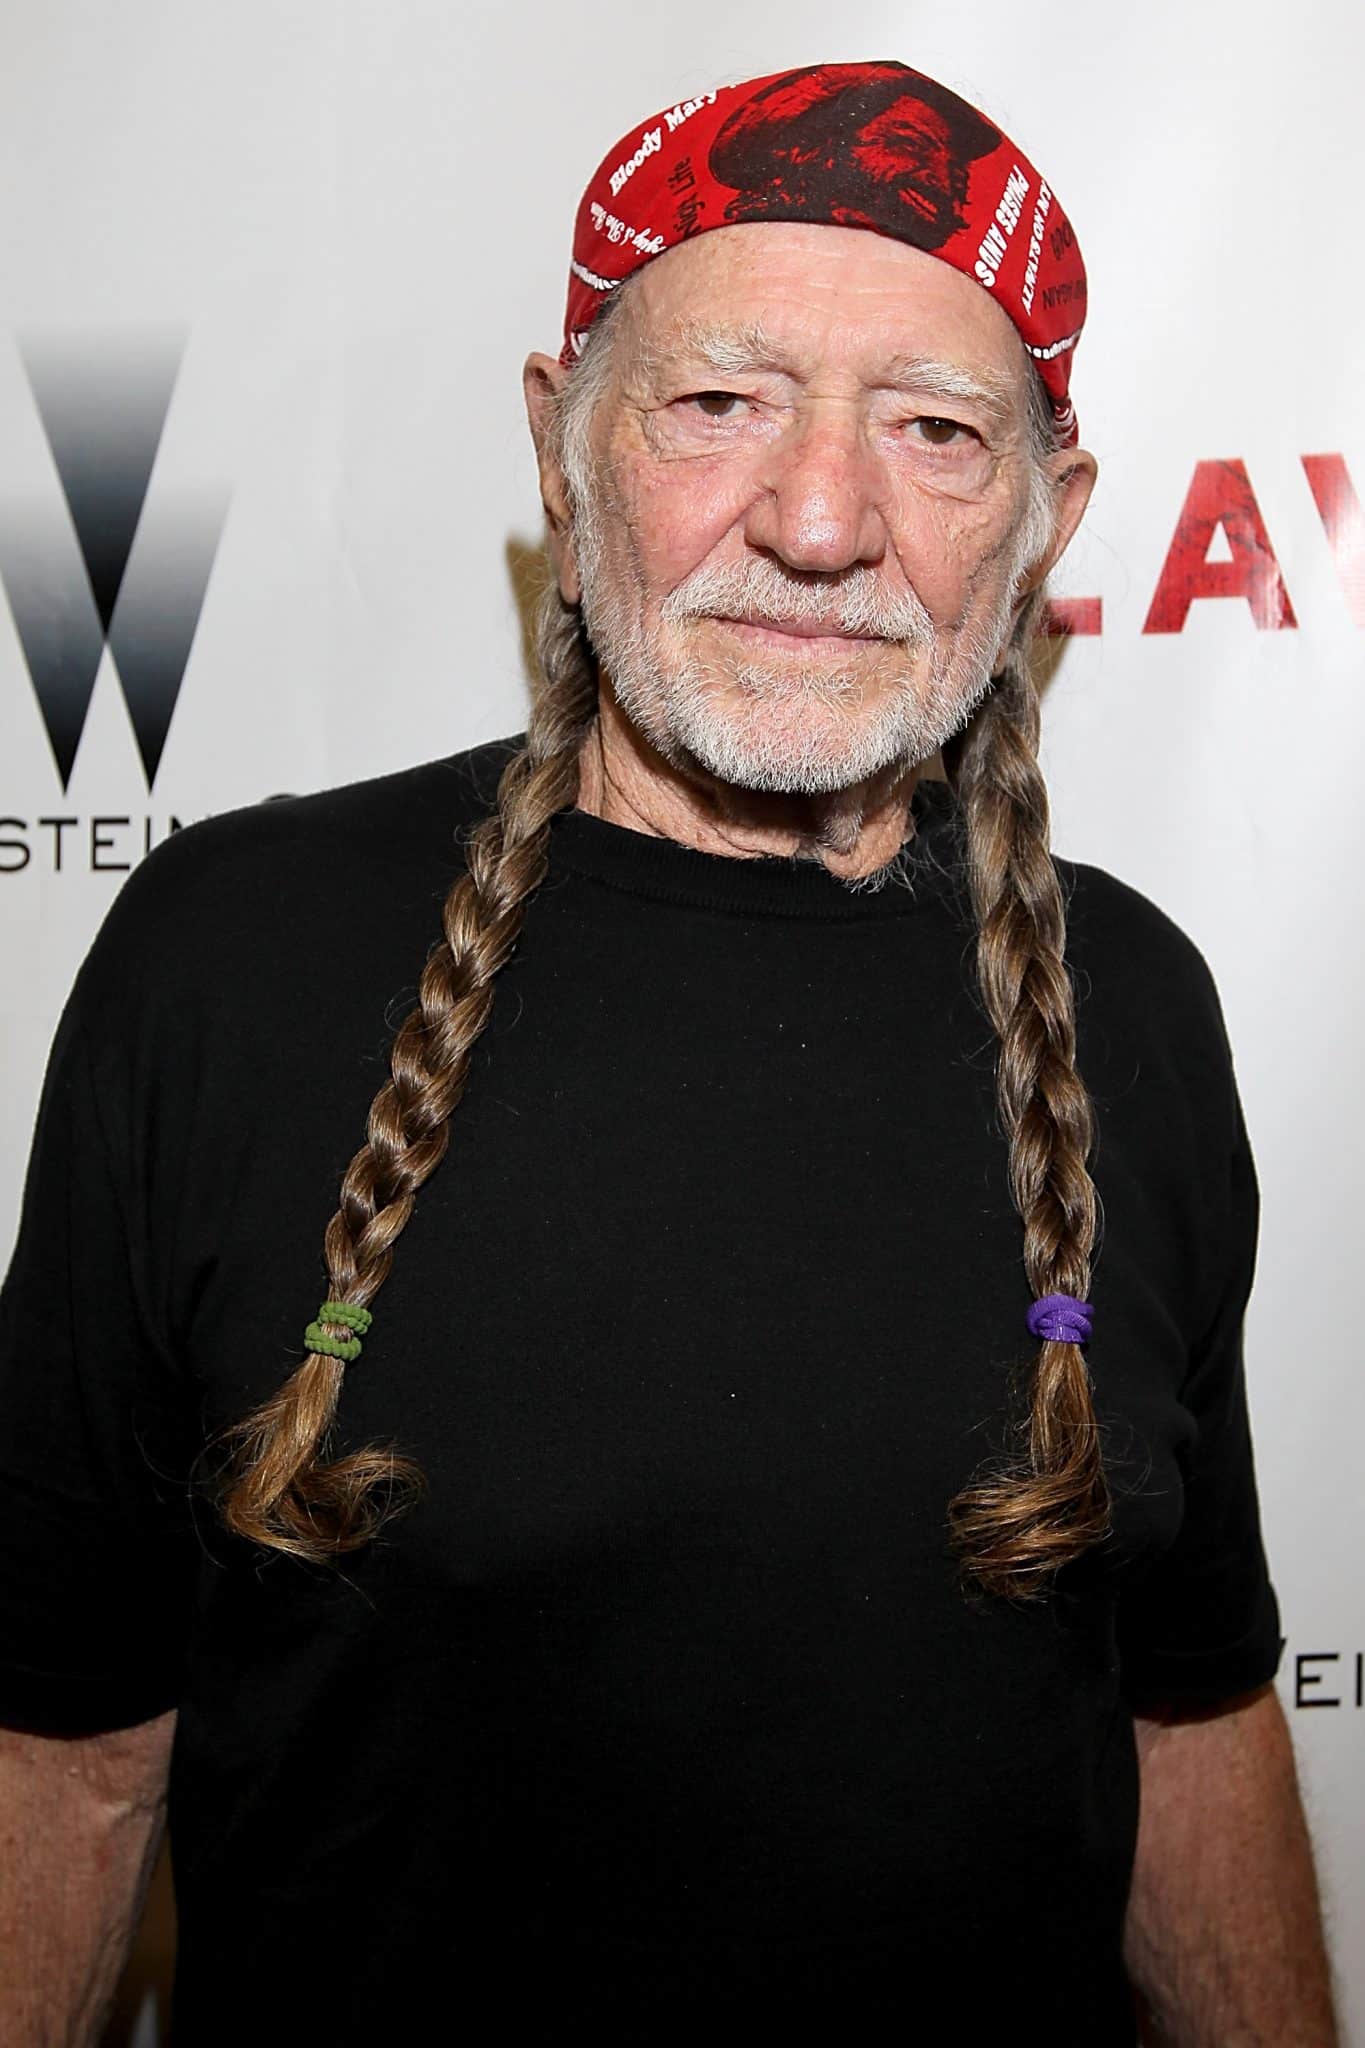 Famous Country Music Hairstyles - Willie Nelson's Braids